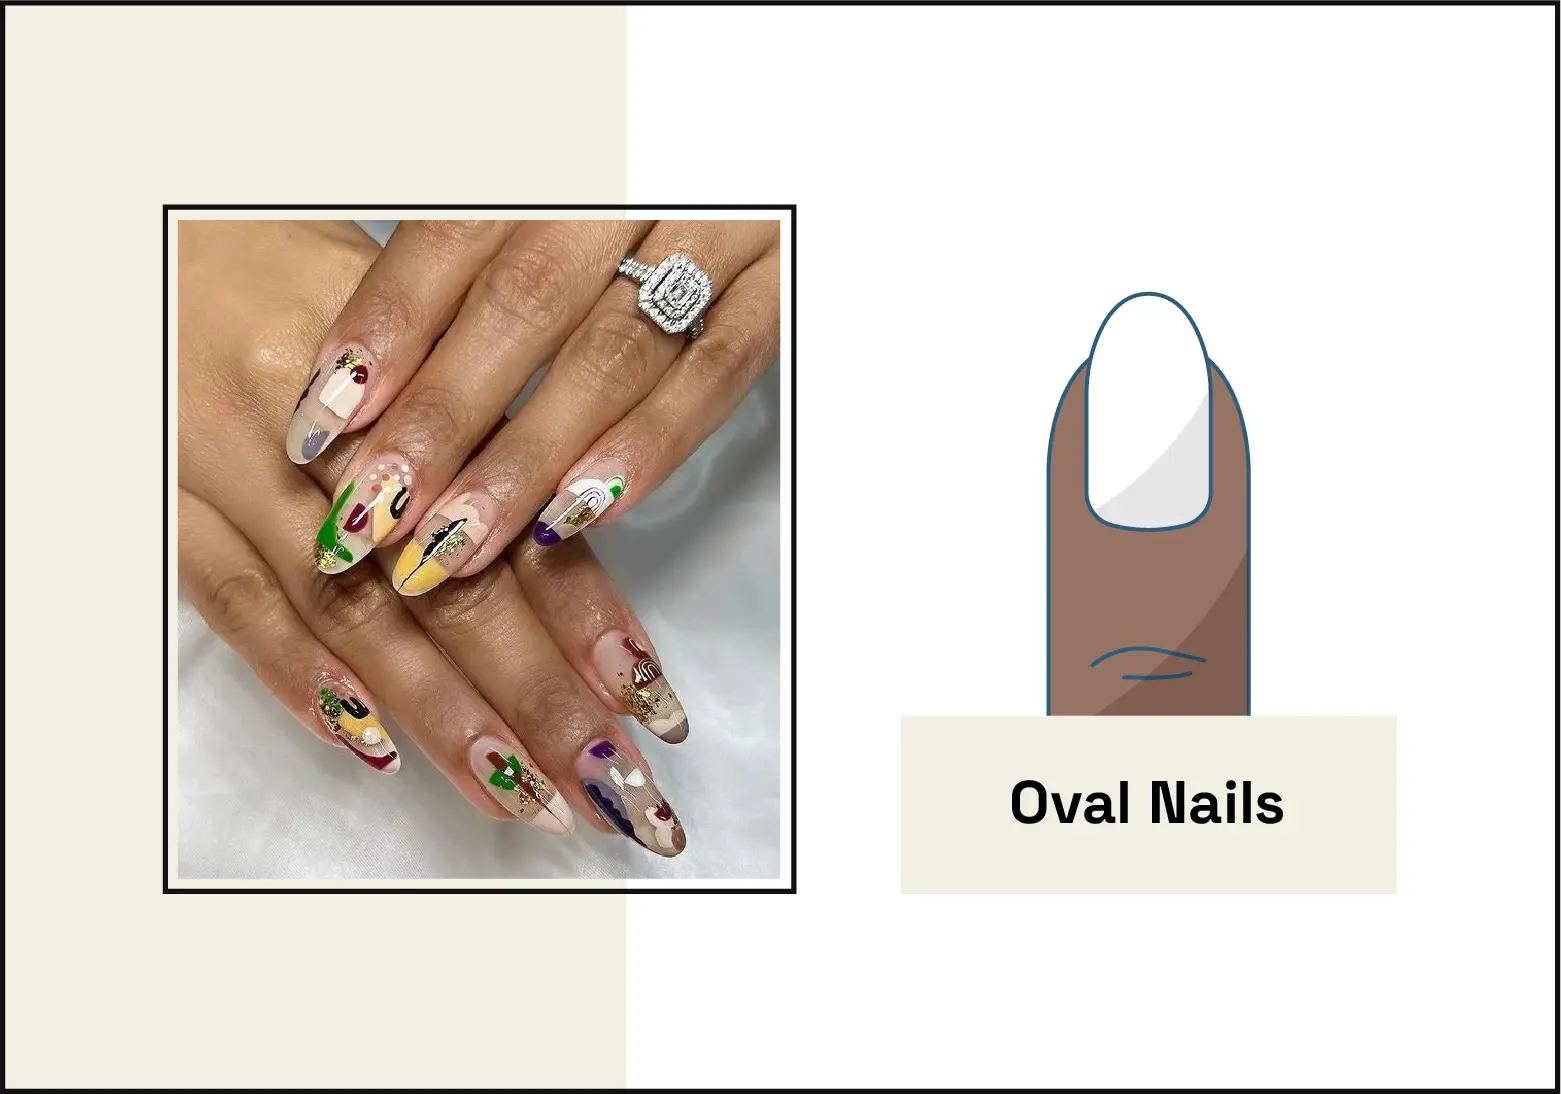 photo of manicure with oval-shaped nails with colorful nail art on the left, illustration of the oval nail shape on the right